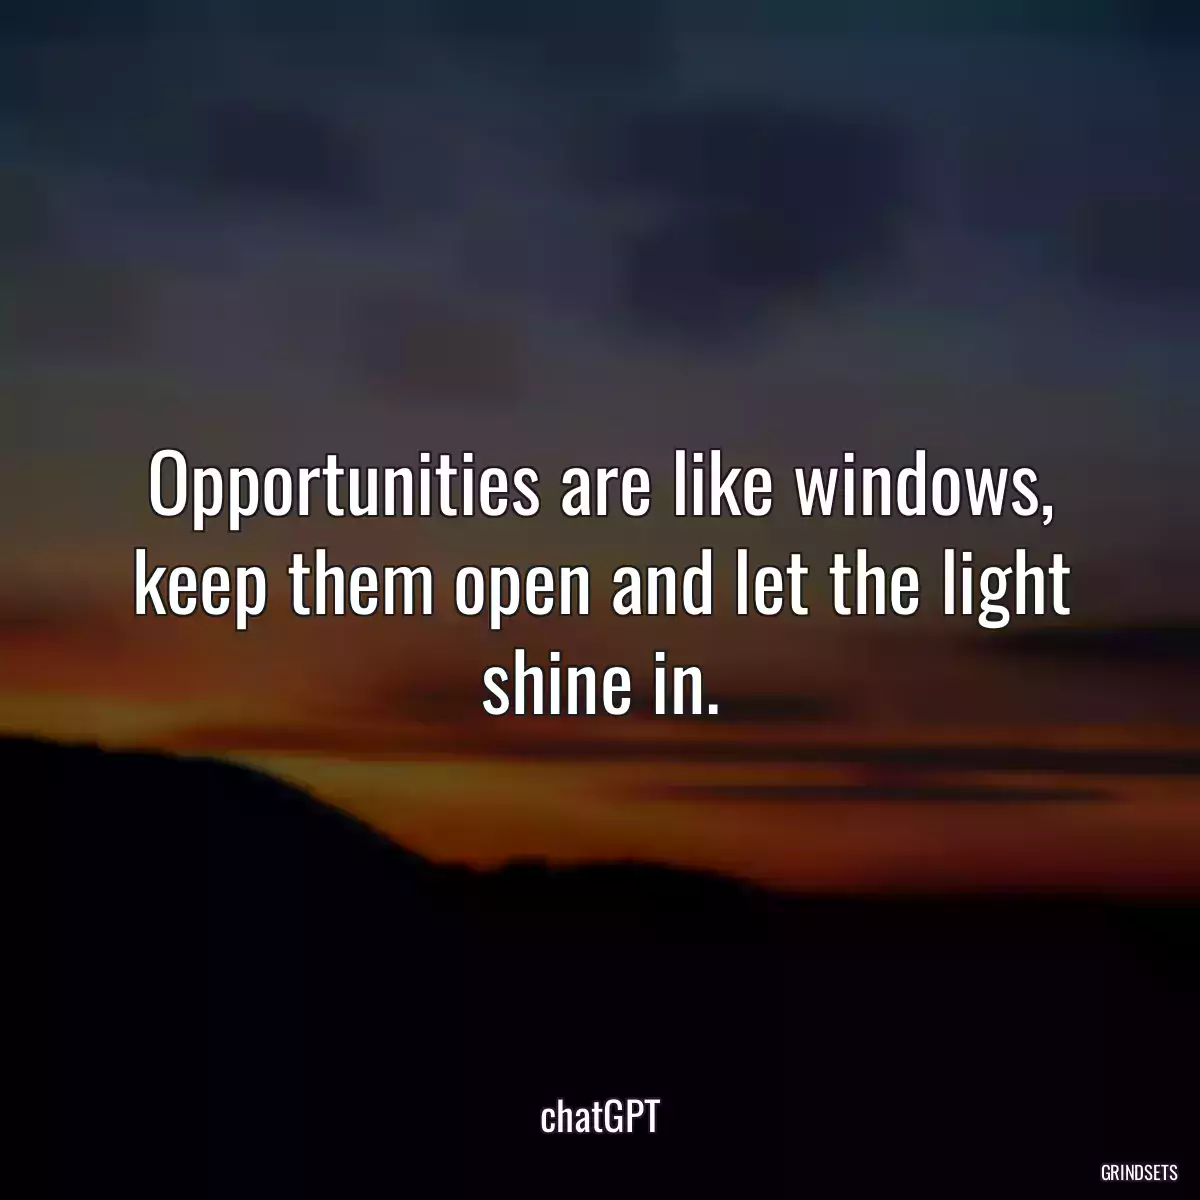 Opportunities are like windows, keep them open and let the light shine in.